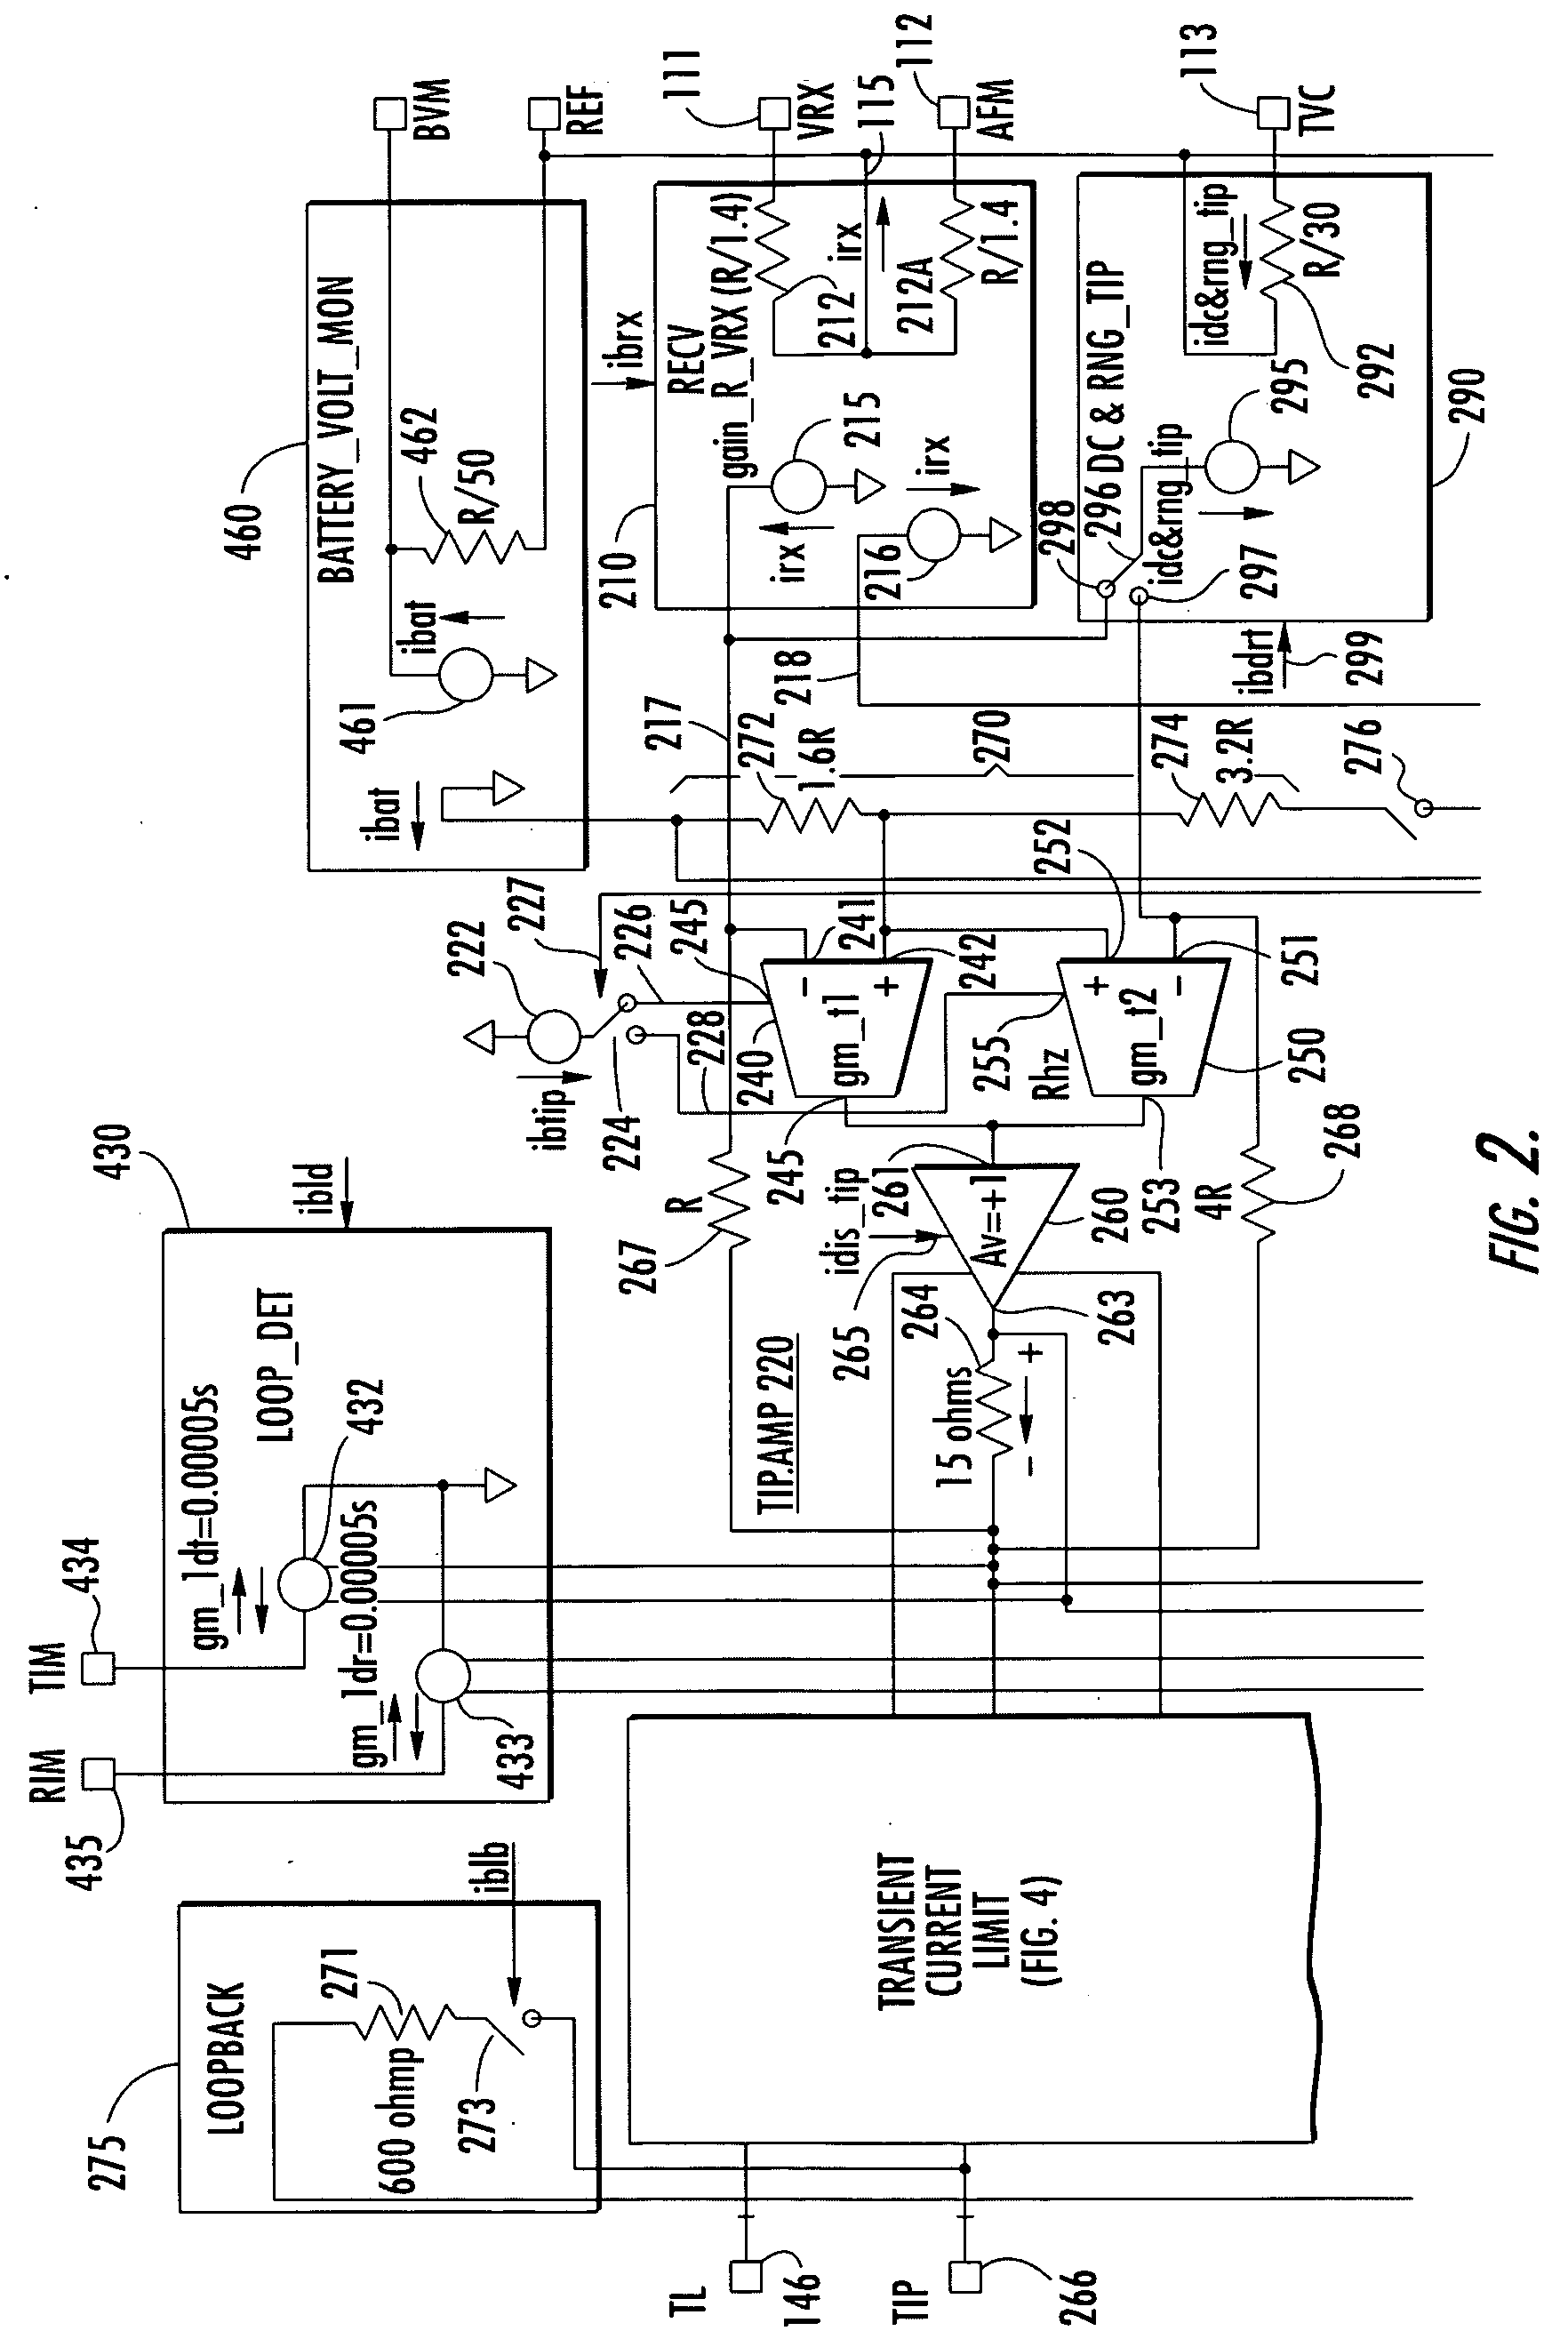 Programmable subscriber line circuit partitioned into high voltage interface and digital control subsections